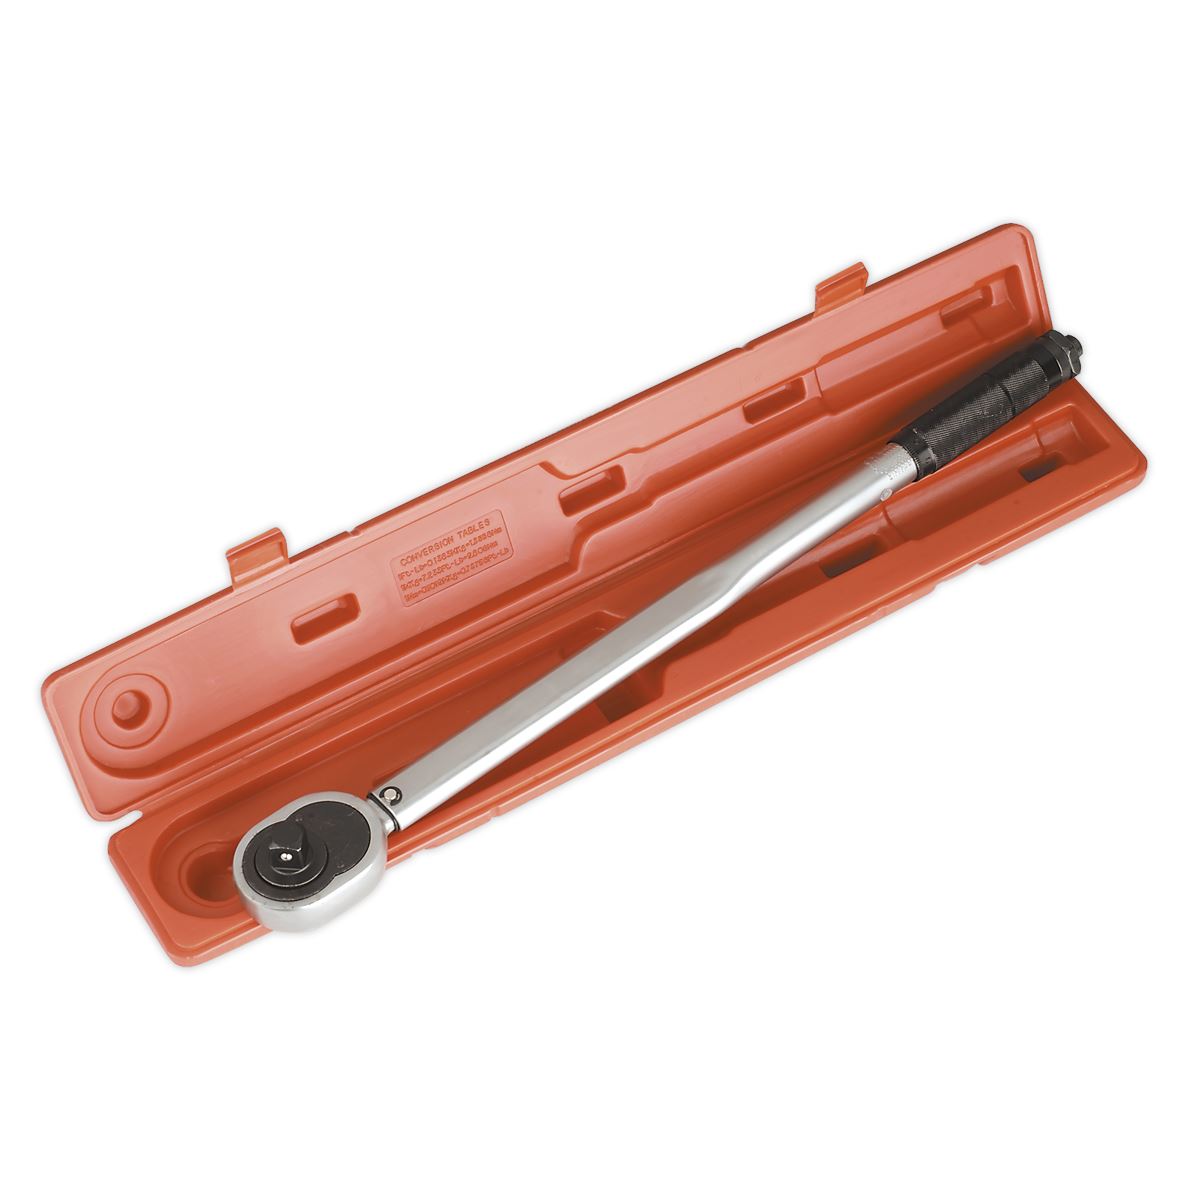 Sealey Premier Torque Wrench Micrometer Style 1/2"Sq Drive 40-210Nm(30-155lb.ft) - Calibrated